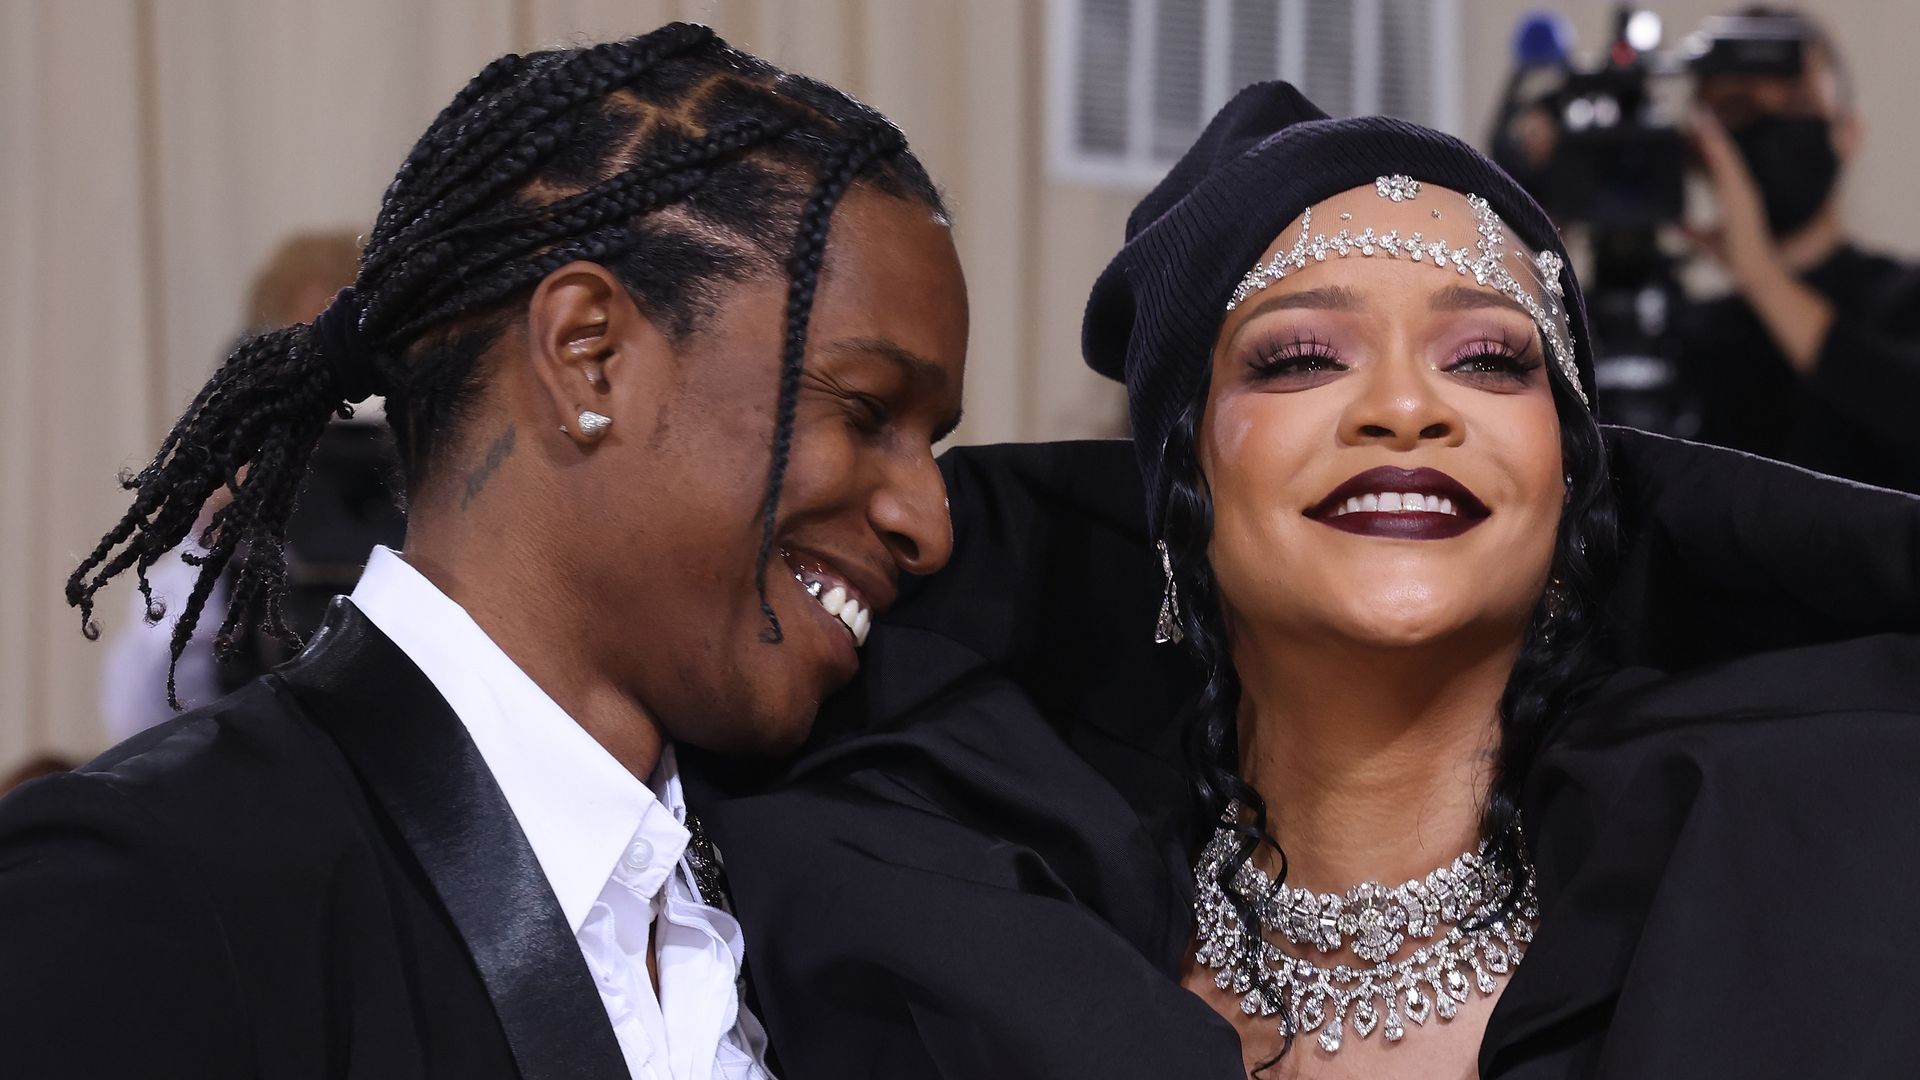 Rihanna comments on baby number 3 with A$AP Rocky